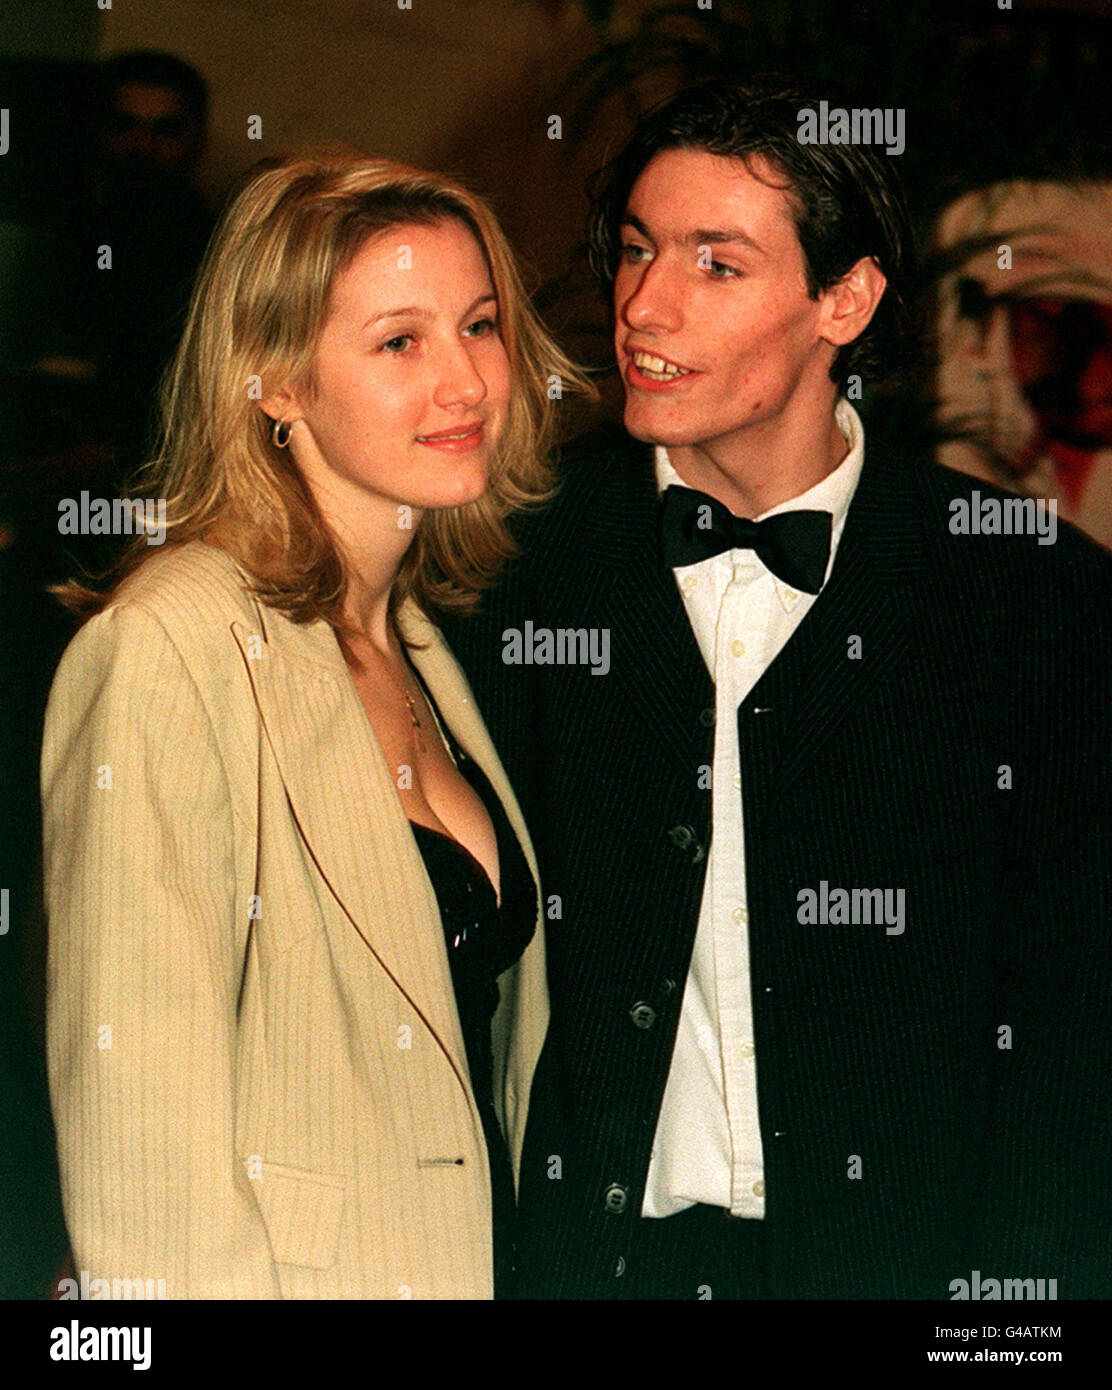 PA NEWS PHOTO 14/2/98  ACTOR DEAN GAFFNEY & GIRLFRIEND ATTEND A CELEBRITY VALENTINES BALL AT THE HILTON HOTEL, LONDON Stock Photo